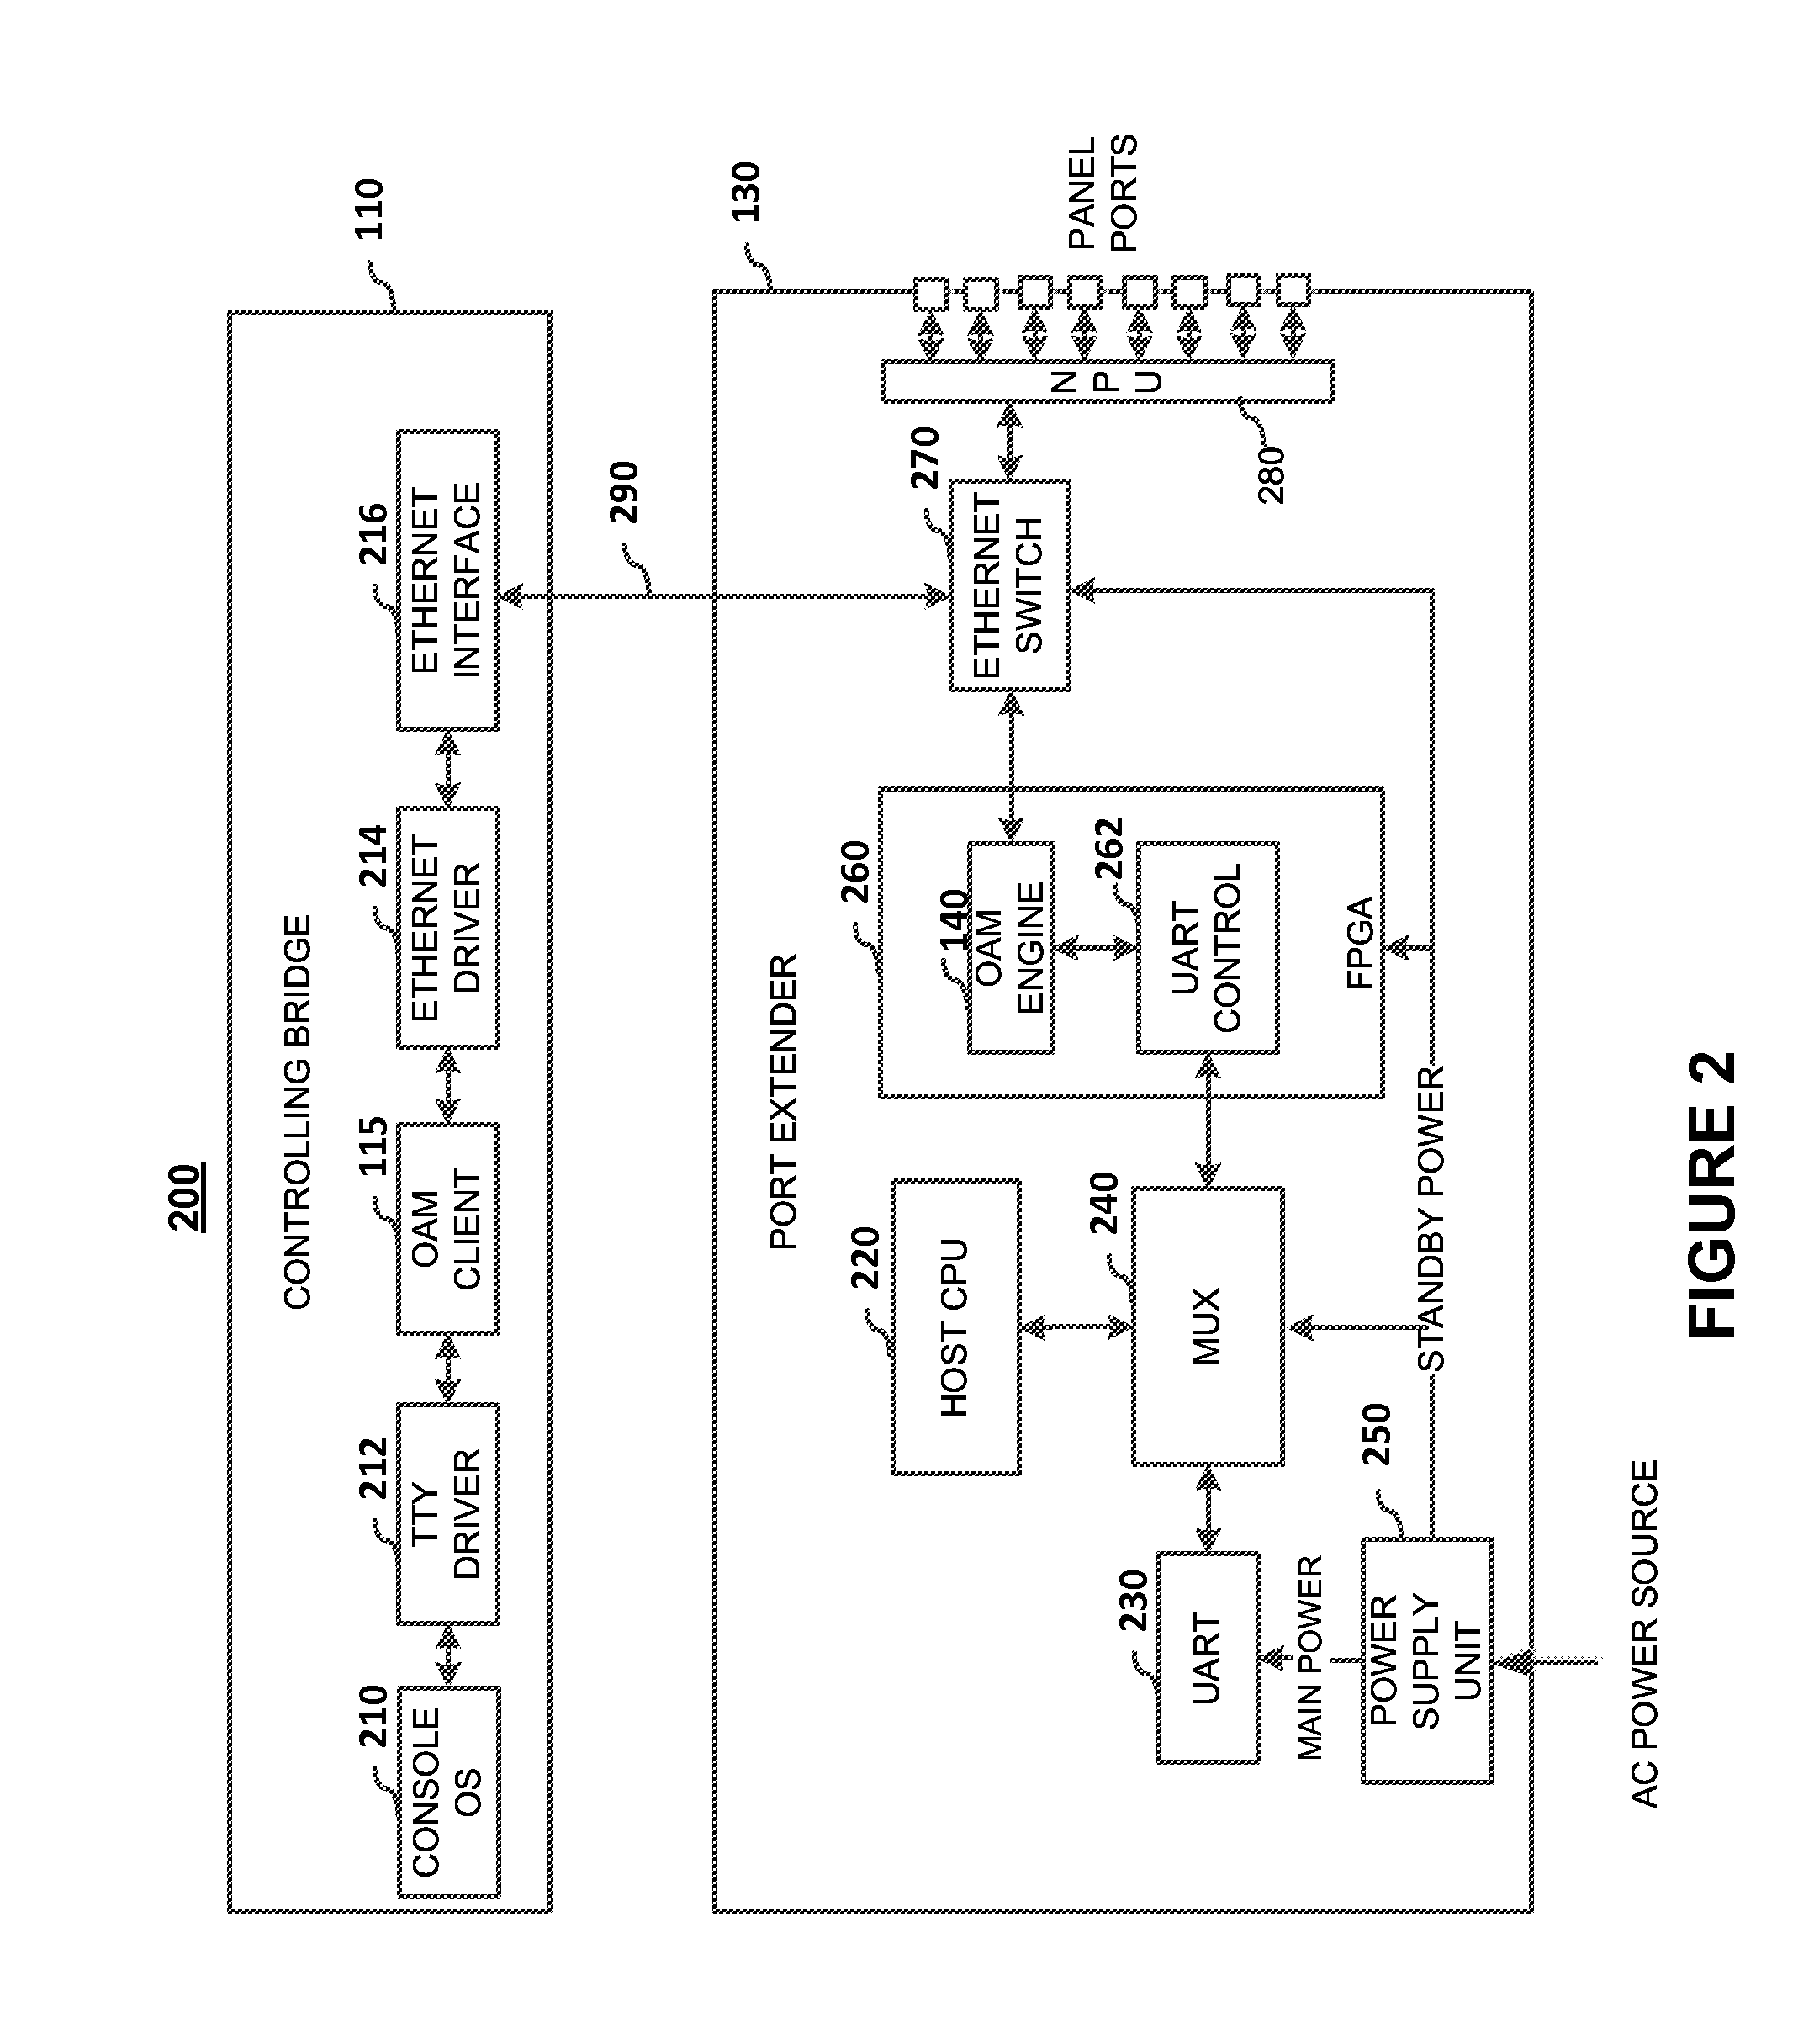 Remote console access of port extenders